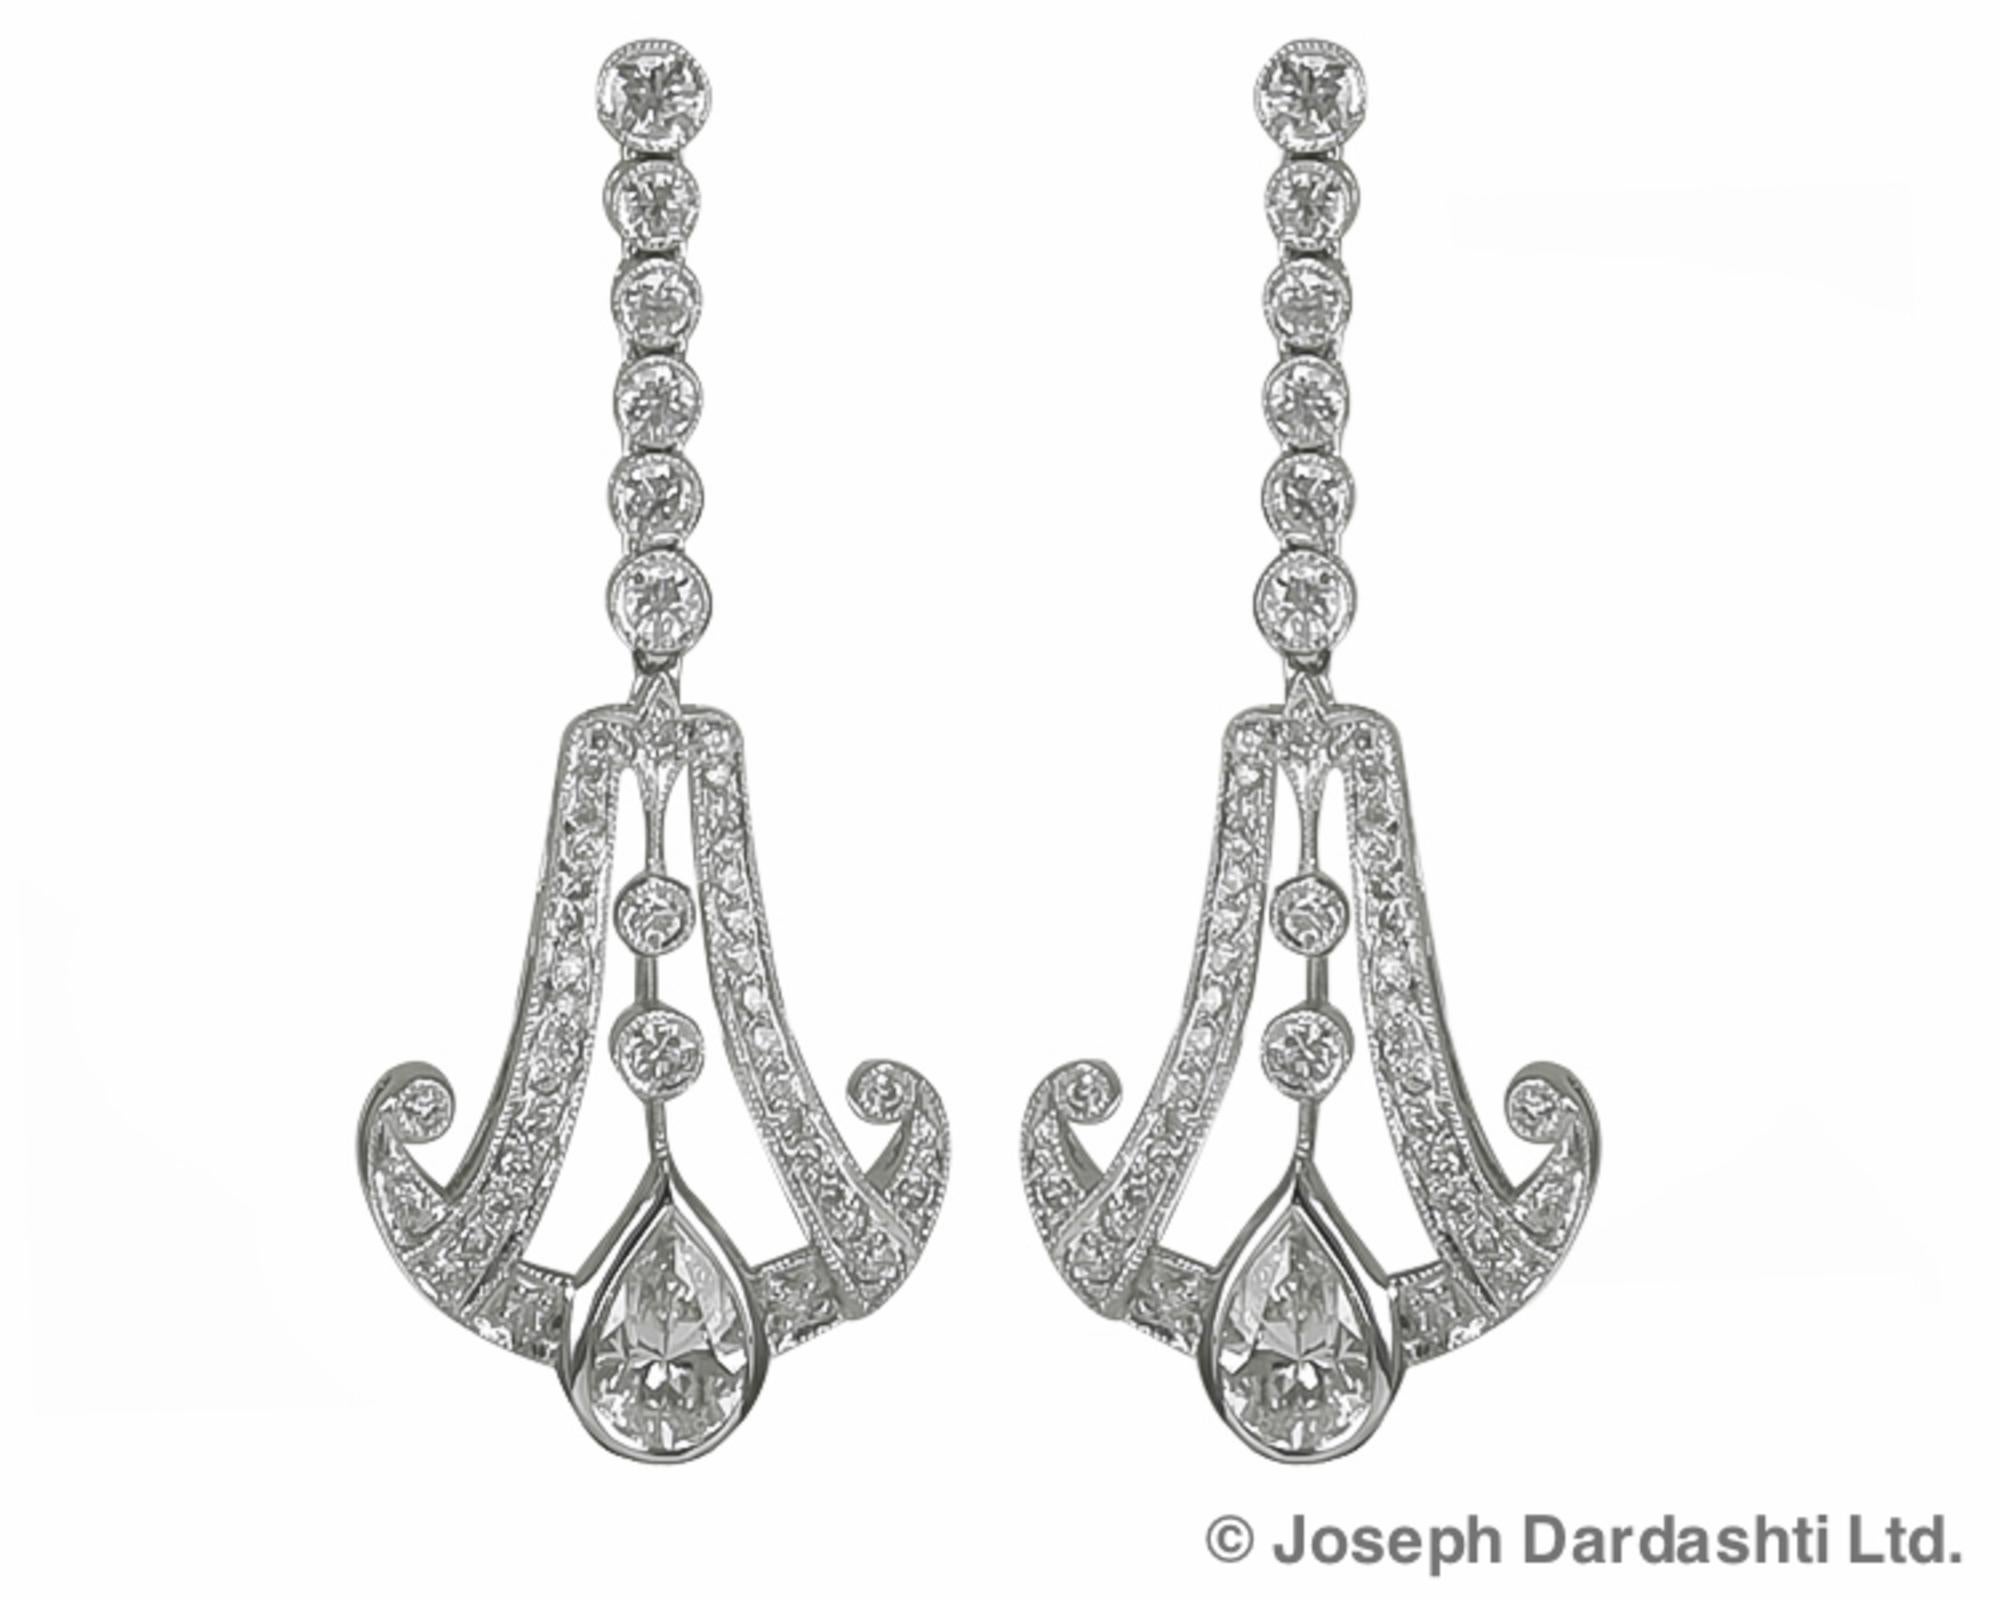 Sophia D 1.44 Carat Pear Cut Diamonds Platinum Earrings In New Condition For Sale In New York, NY